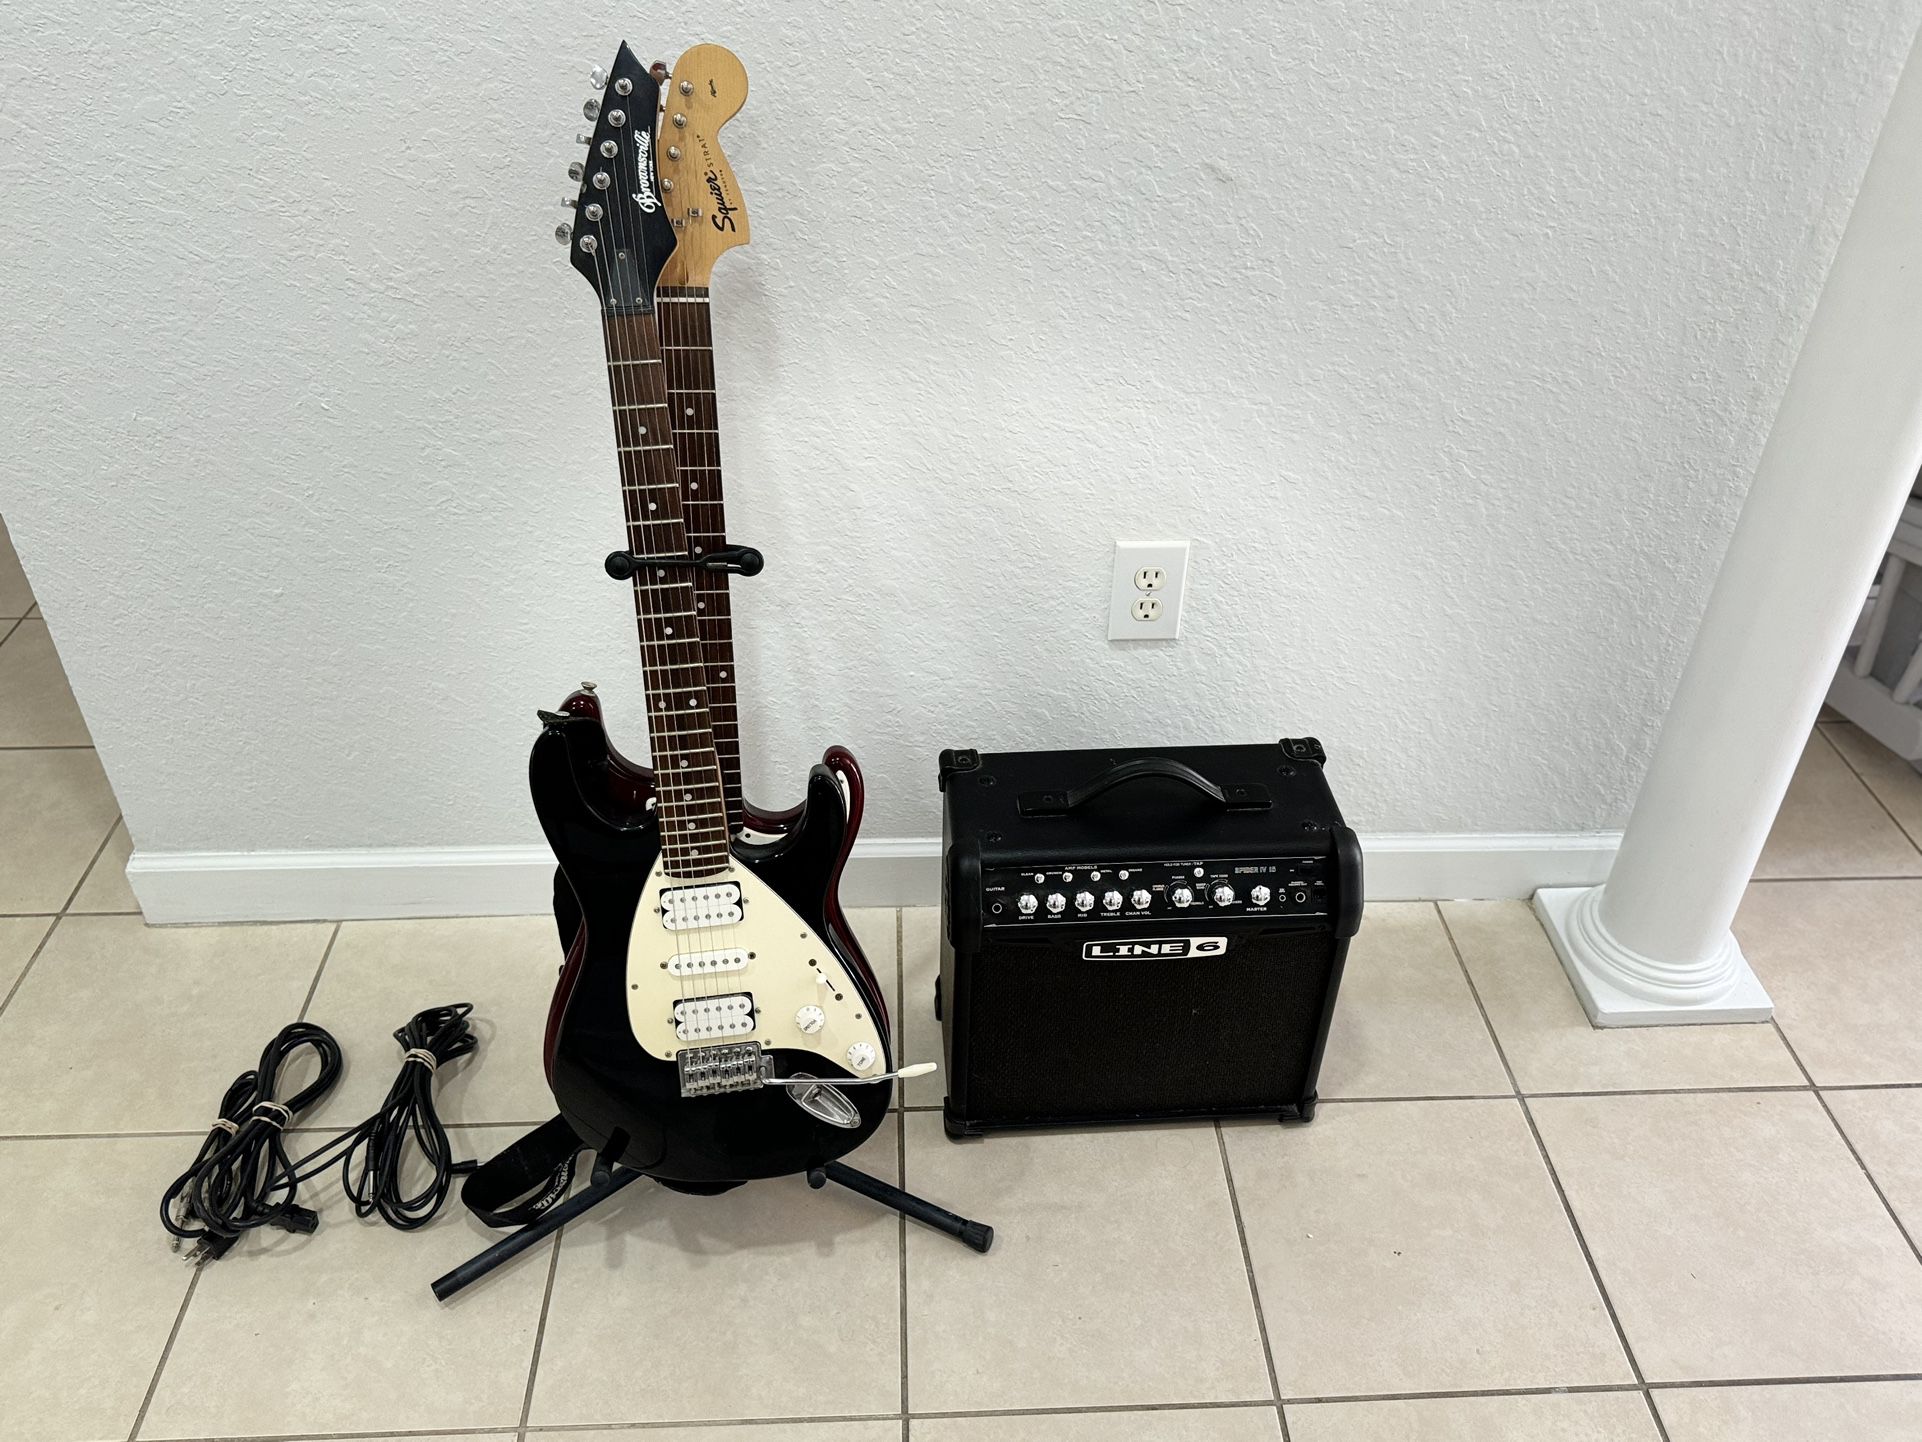 Two electric guitars. One Brownsville and Squier, plus Amplifier Line 6. Everything in good condition. 